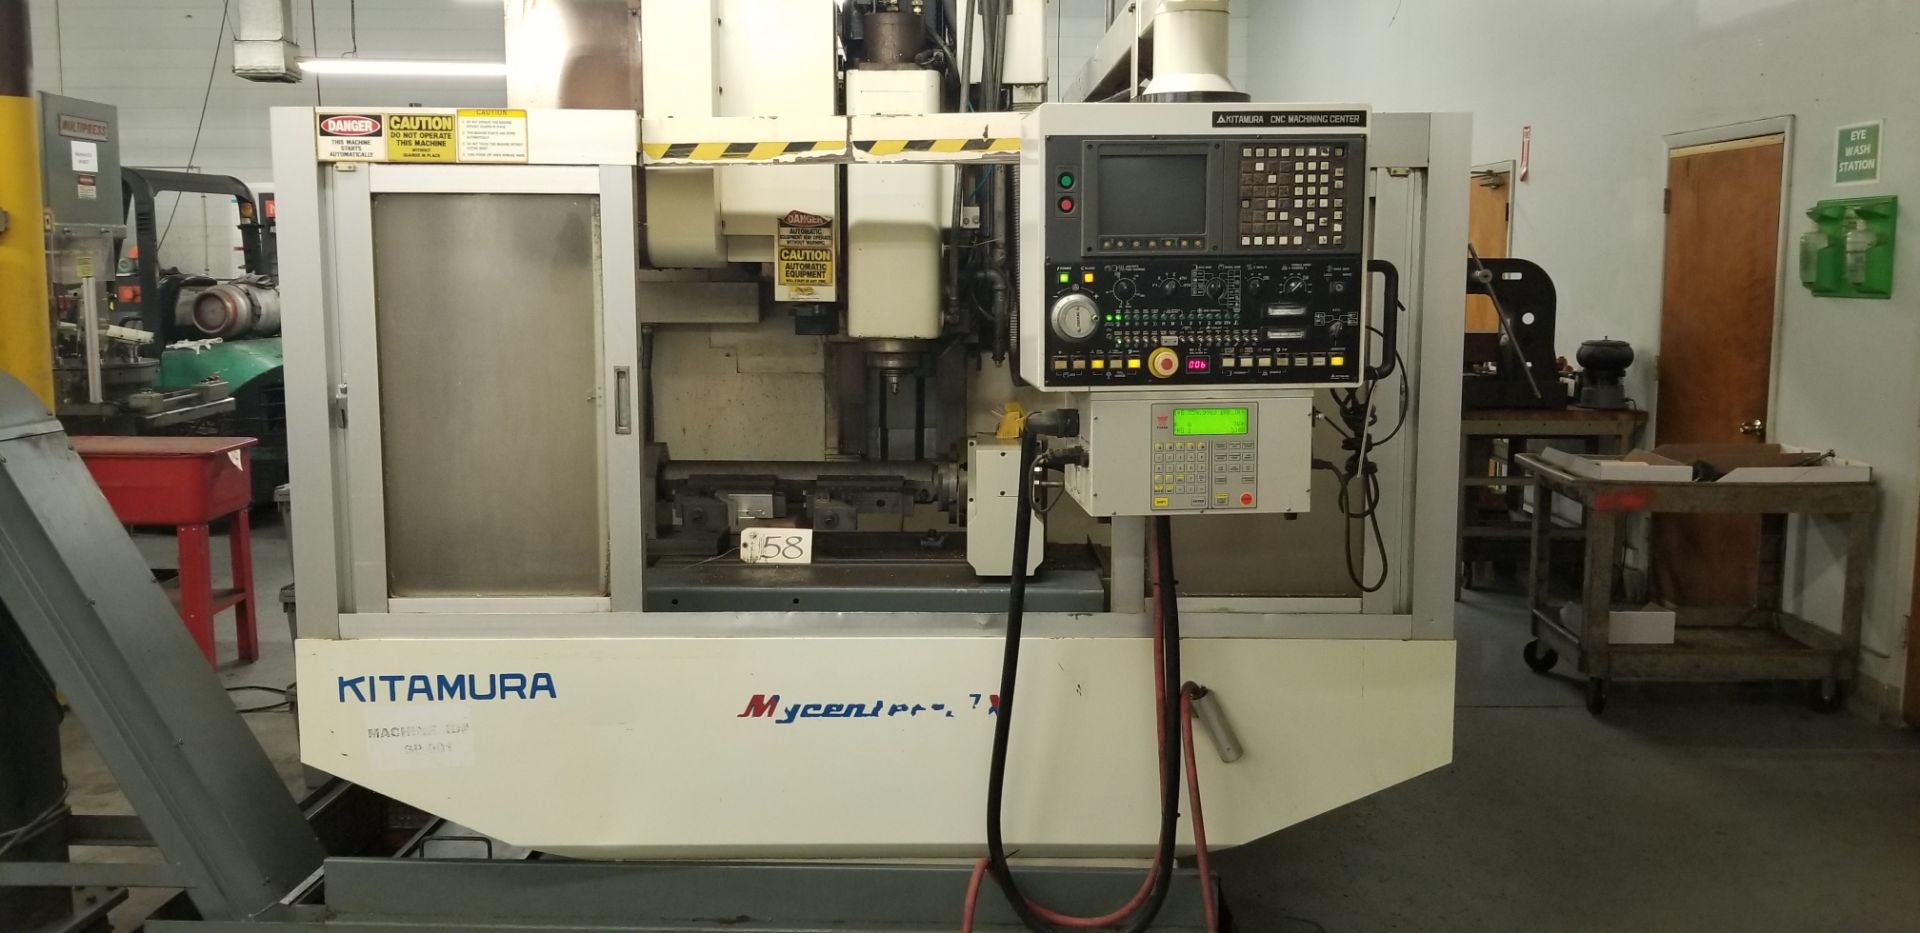 Kitamura MyCenter 3X Wired for 4th Axis CNC Vertical Machining Center - Image 8 of 8